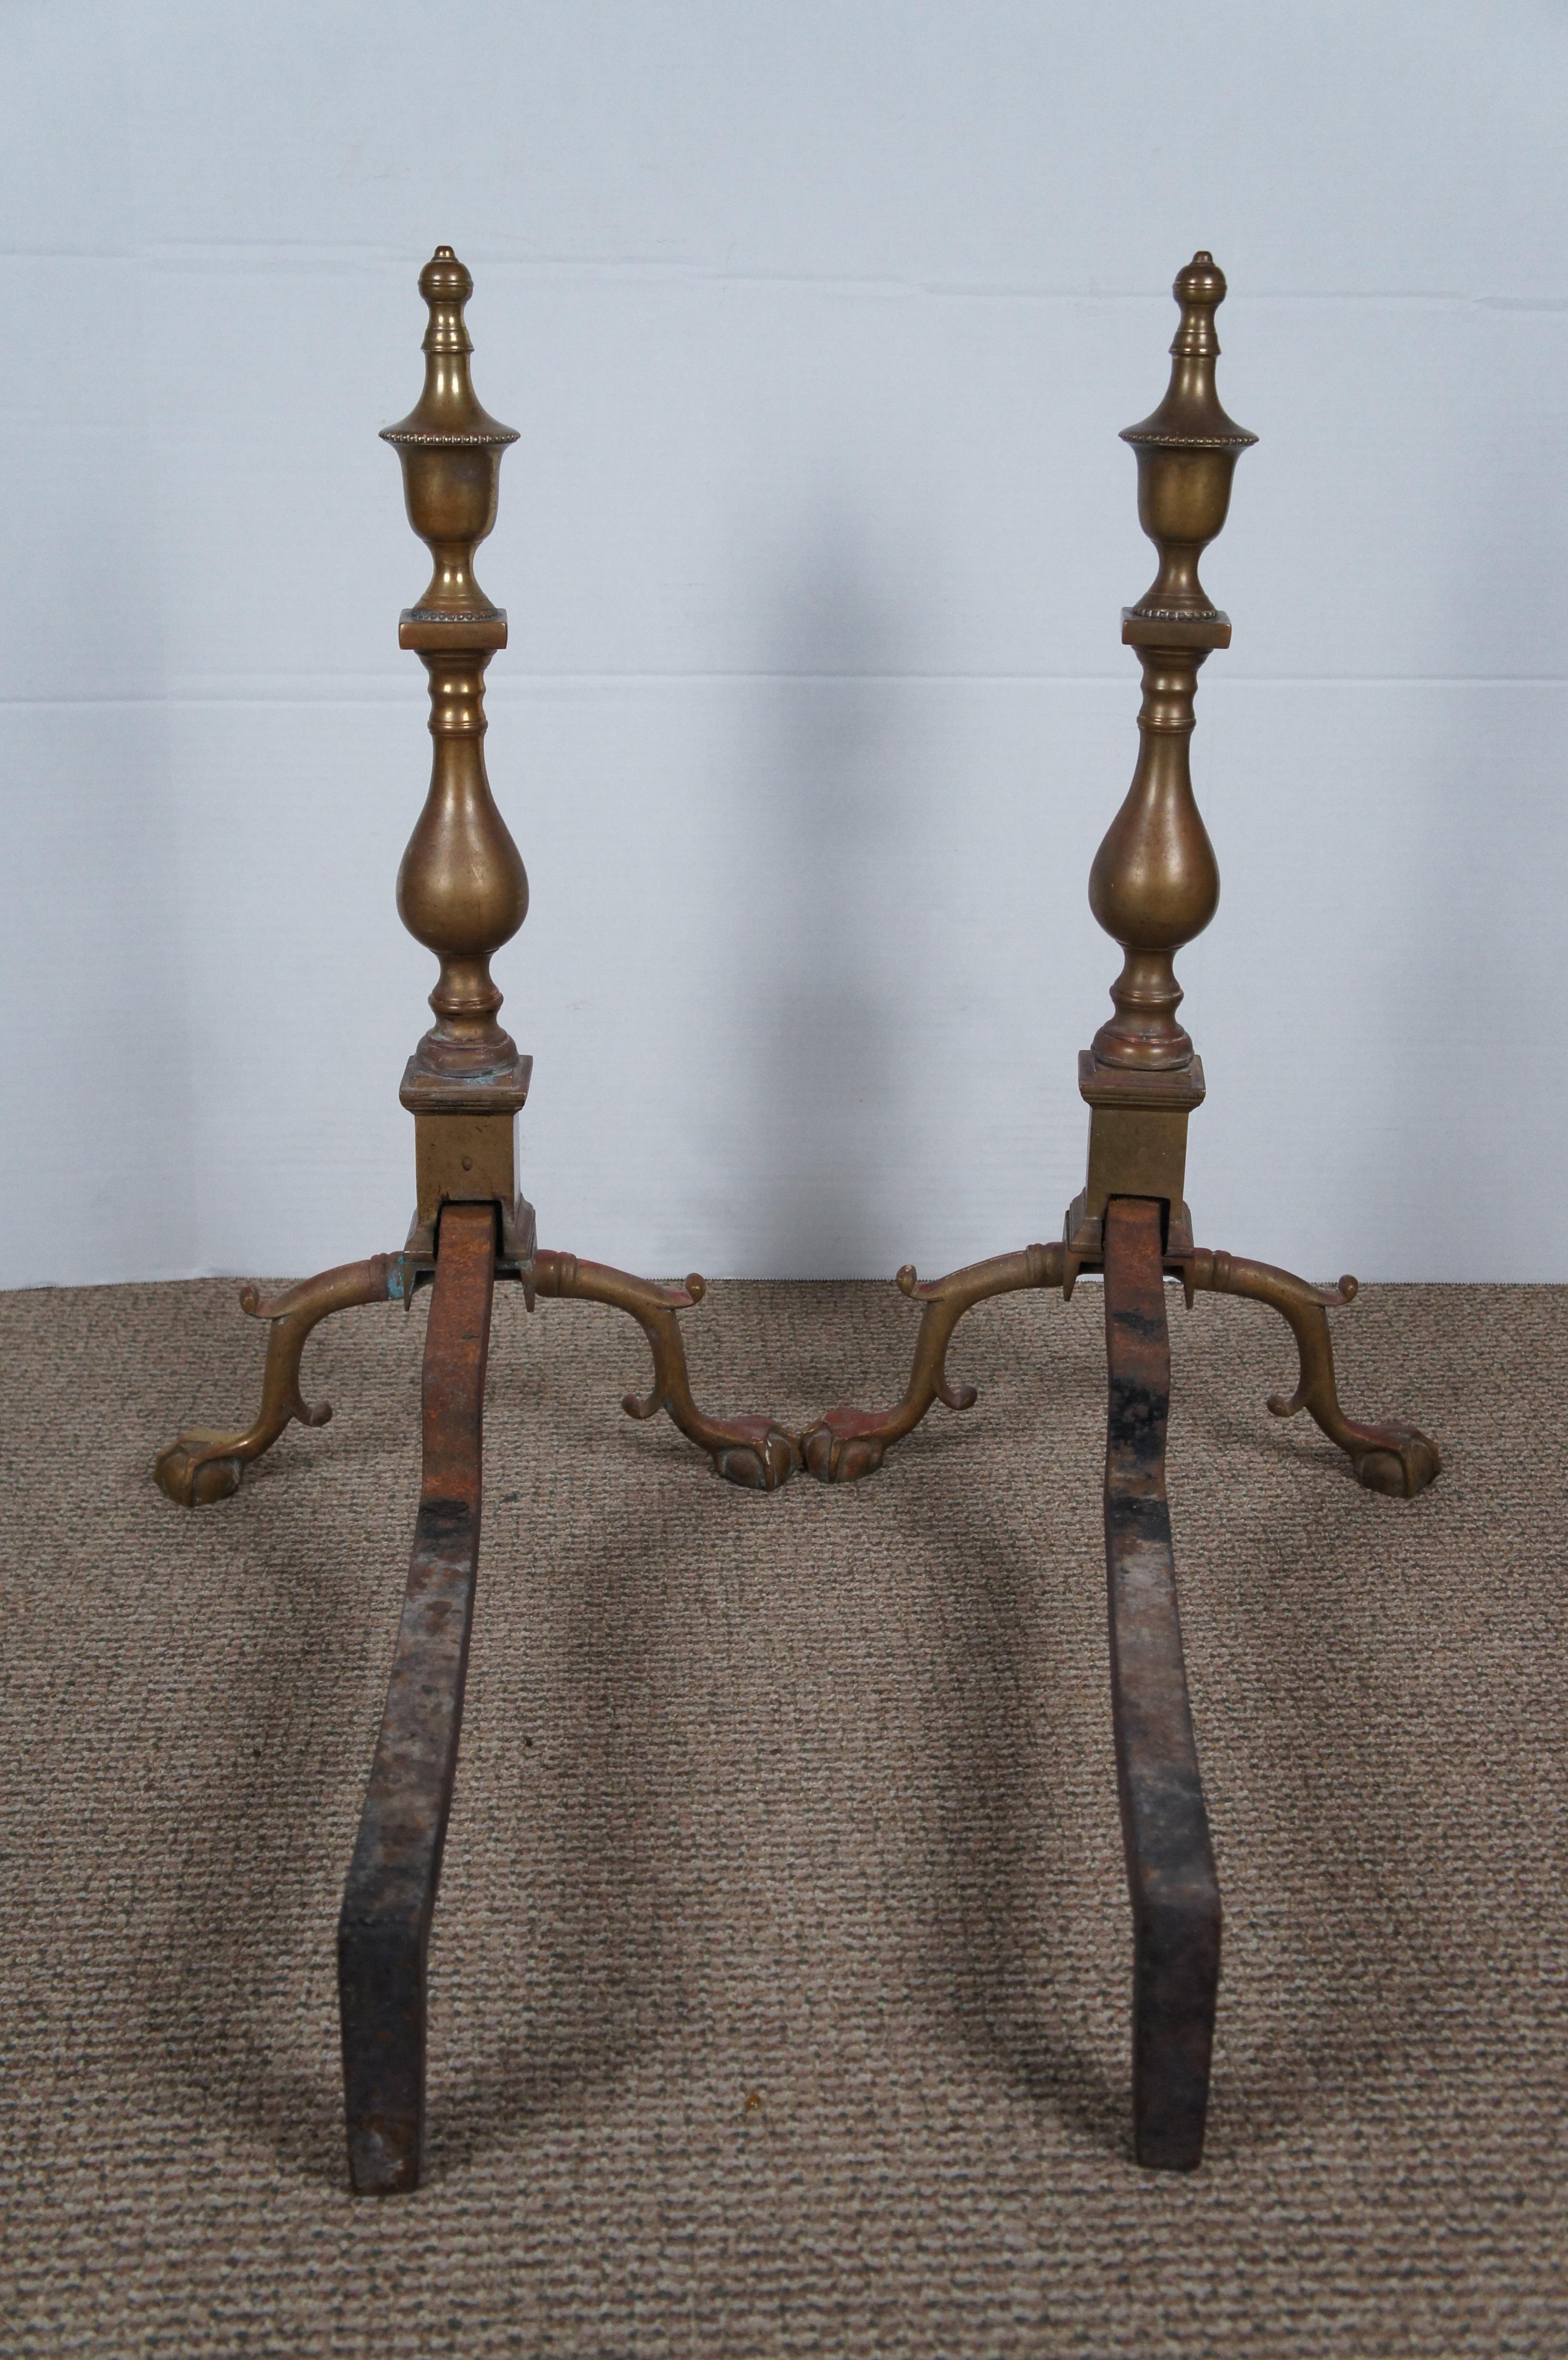 Virginia Metalcrafters Harvin Colonial Williamsburg Brass Andirons Firedogs   For Sale 3